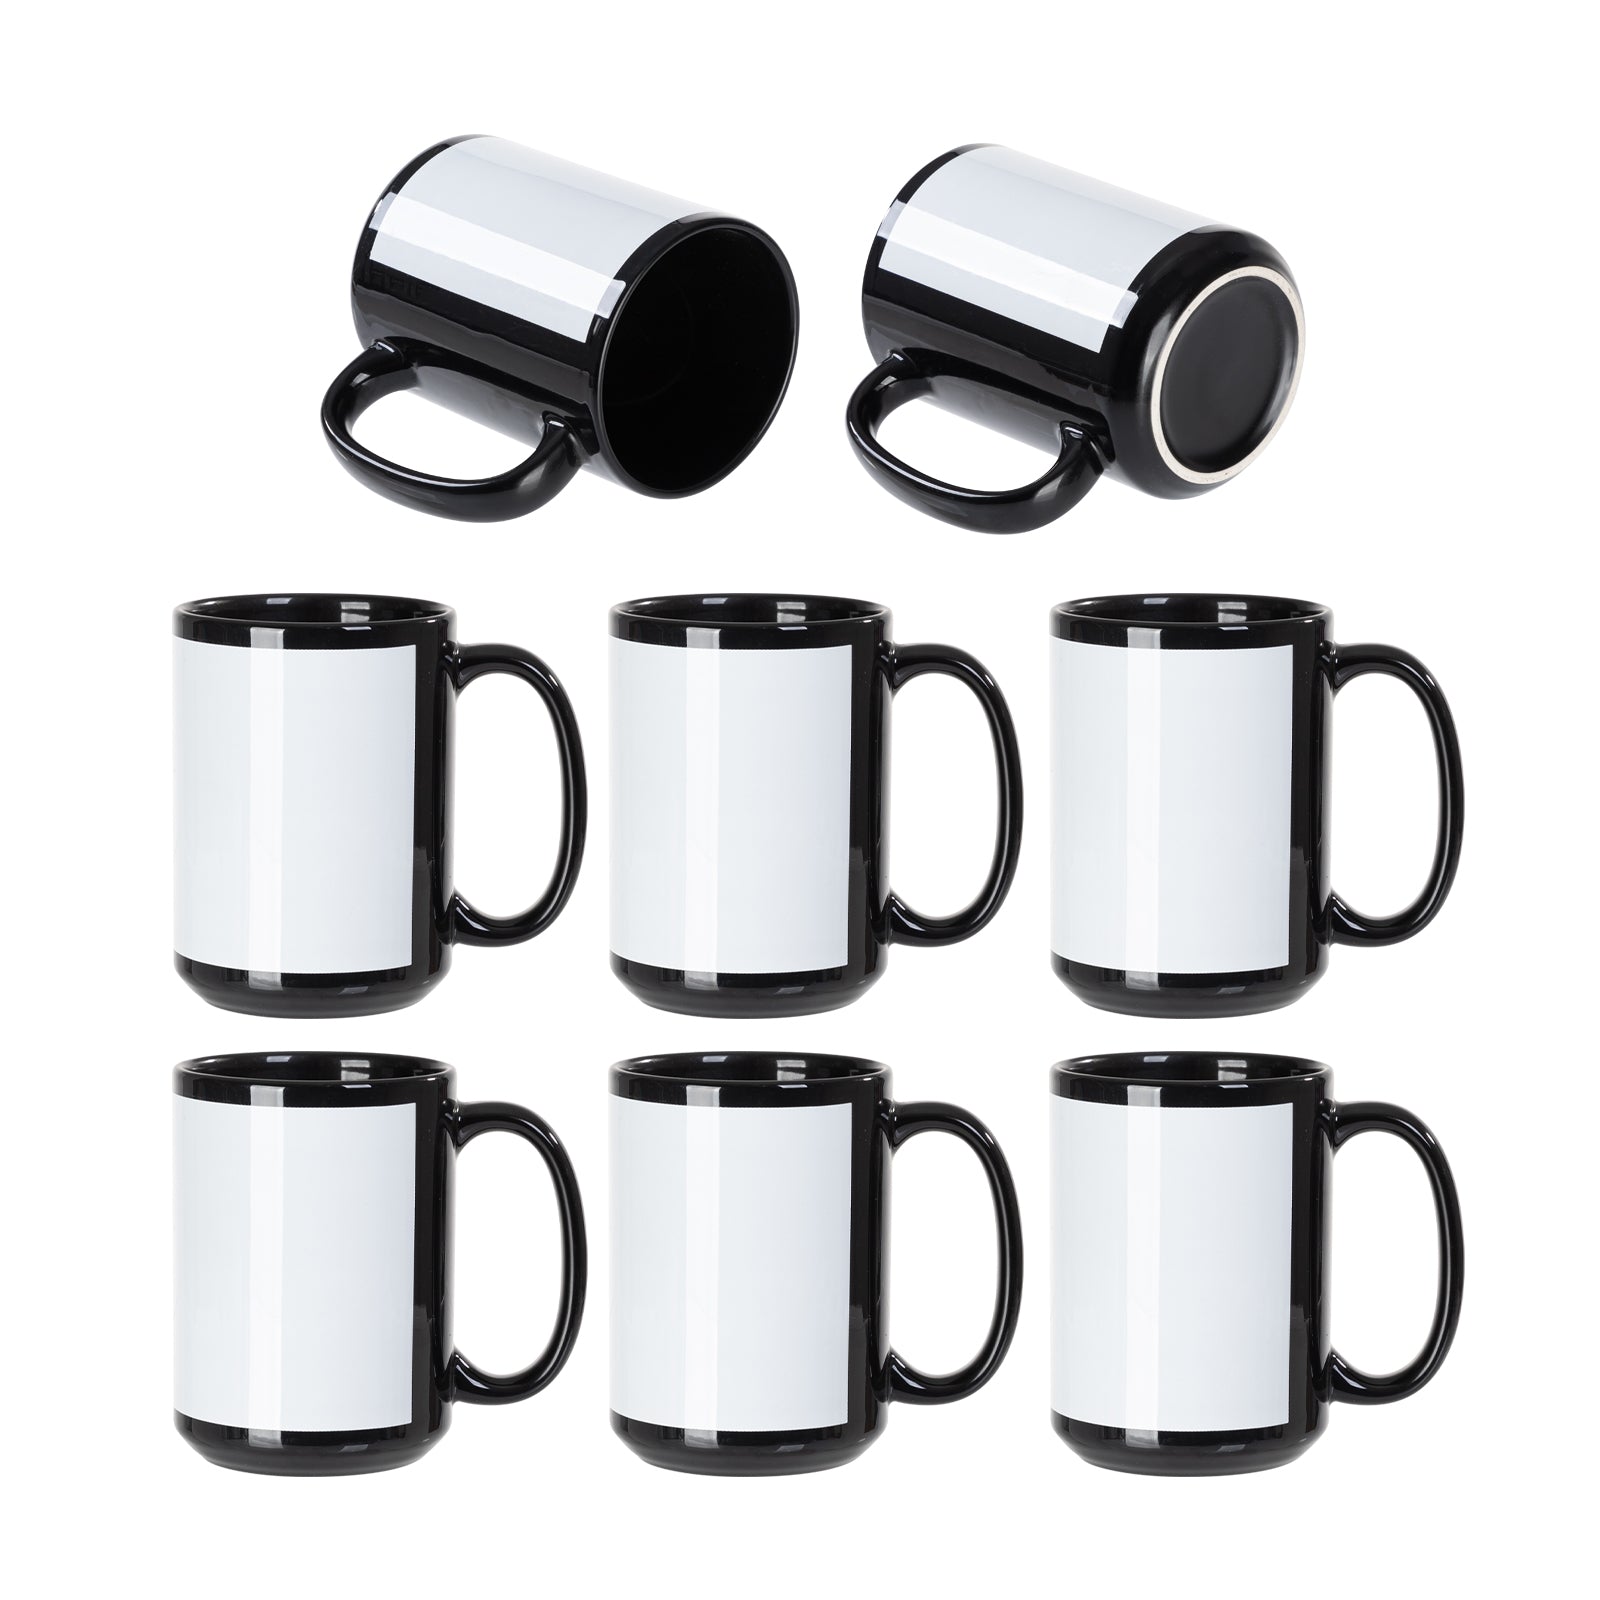 AGH 8pcs Sublimation Mugs 15 oz Blank Bulk, 15oz Sublimation Coffee Mug,  White Ceramic Plain Mug Cups for Sublimation with Stainless Steel Spoon for